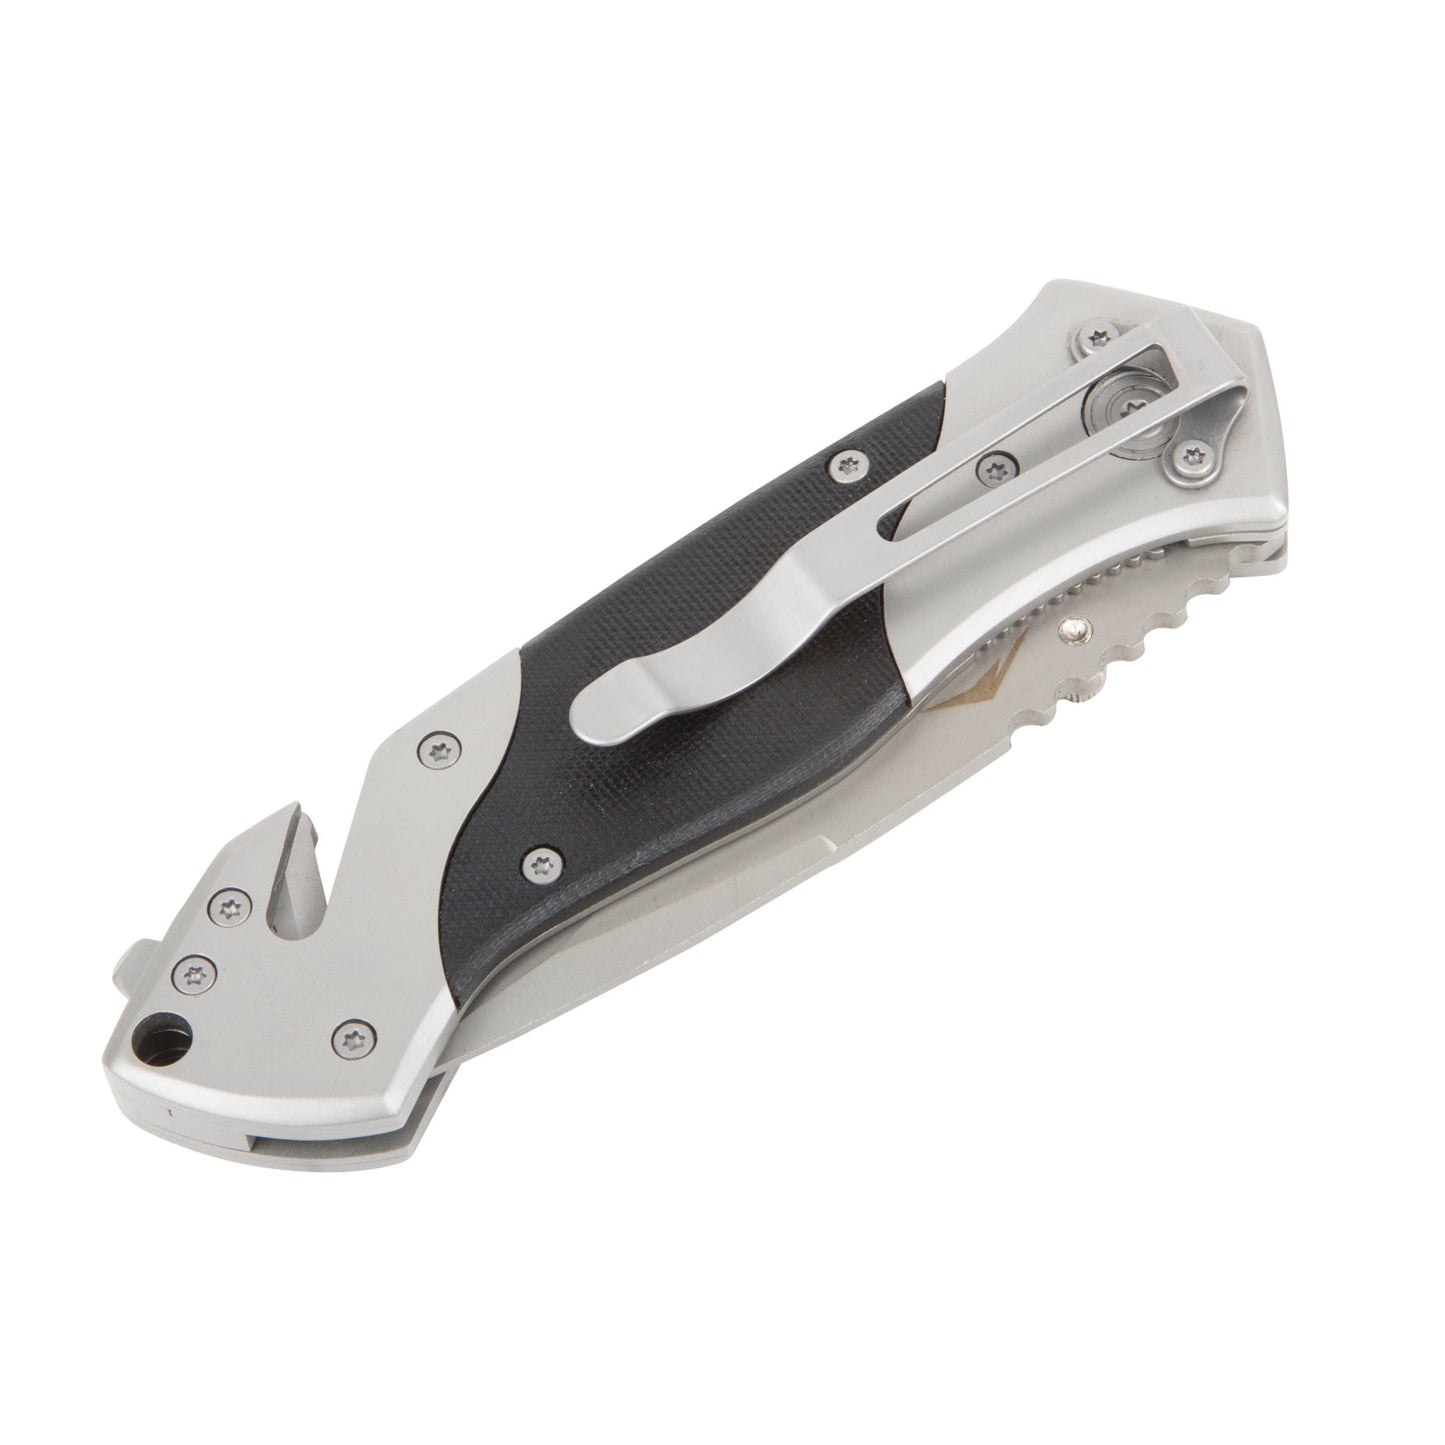 Rescue Knife with Strap Cutter 3.3-Inch Partially Serrated 440 Stainless Blade